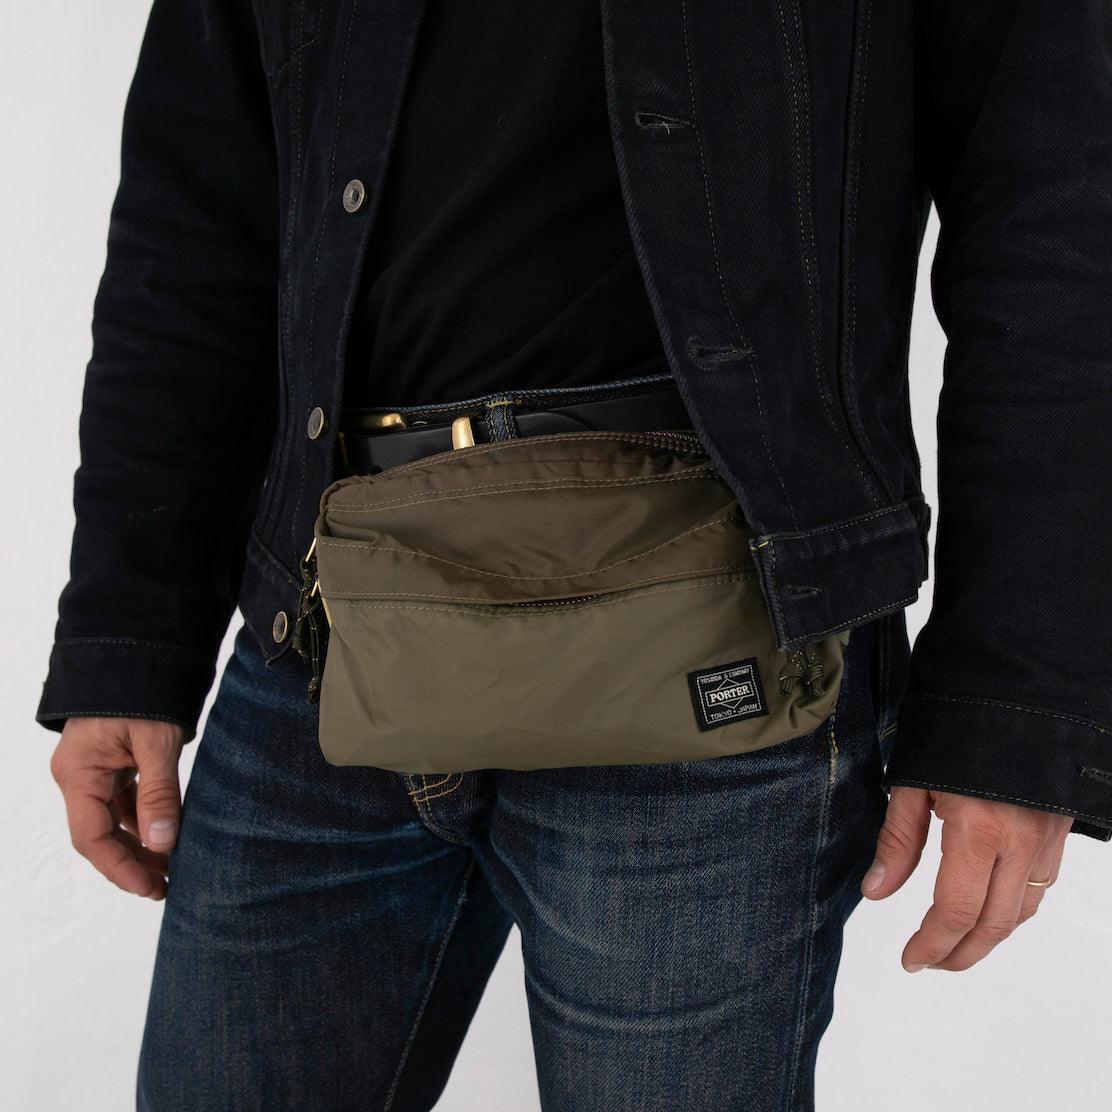 Image showing the Porter-Yoshida & Co - FORCE 2WAY WAIST BAG - Olive Drab which is a Bags described by the following info Accessories, Bags, Porter-Yoshida & Co. and sold on the IRON HEART GERMANY online store